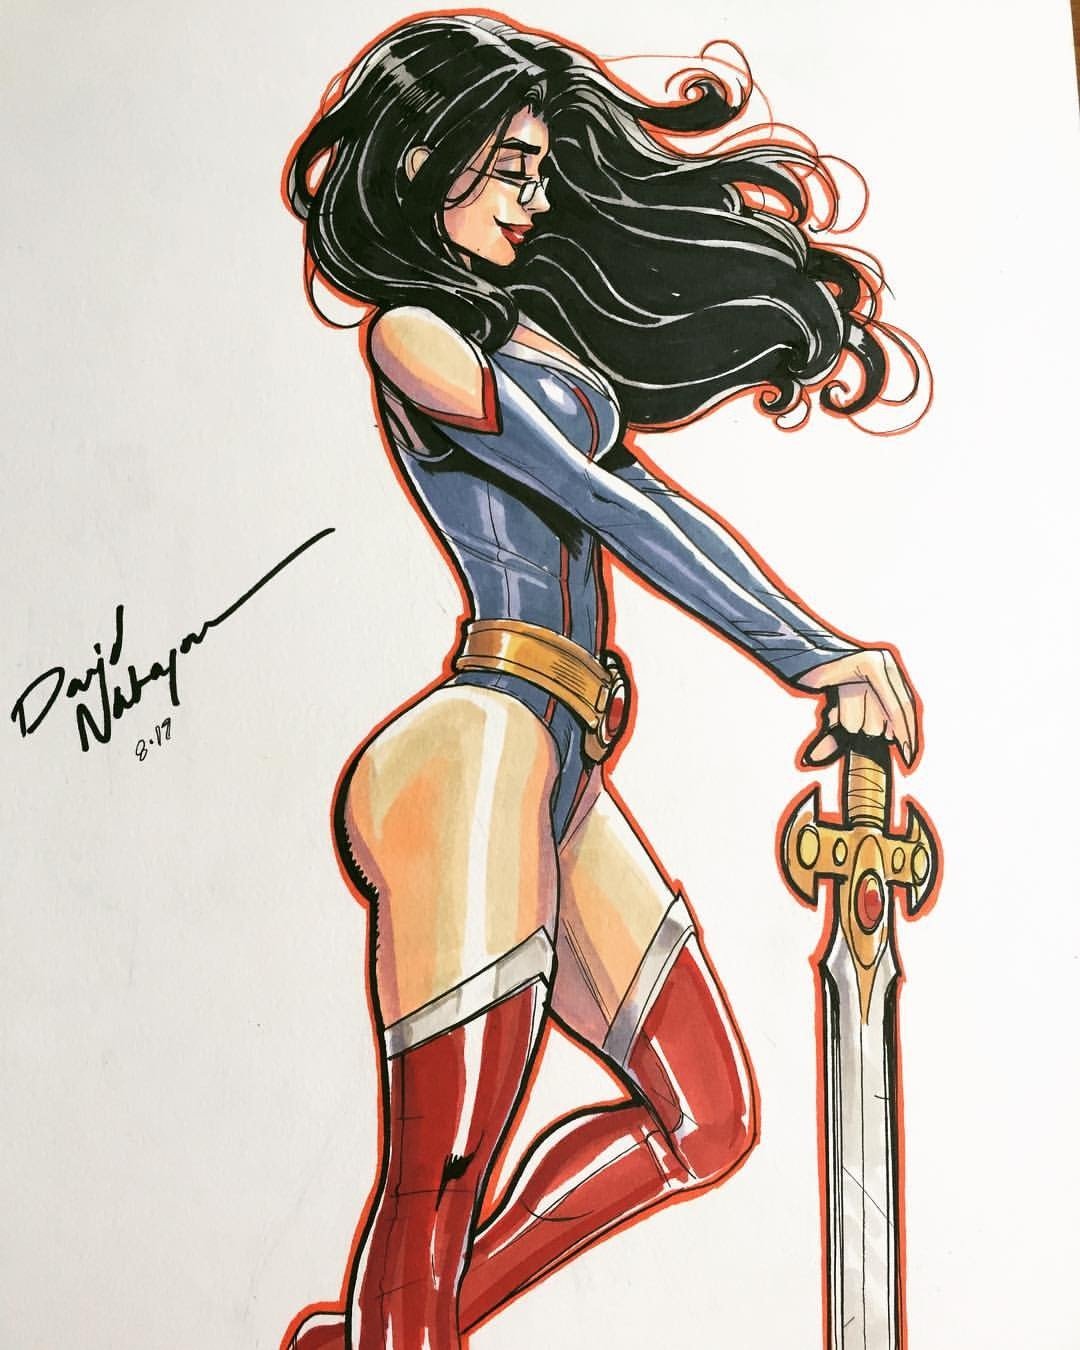 Photo by Justanotherguy with the username @Justanotherguy79,  October 6, 2017 at 10:01 PM and the text says 'dna-1:

Sela from Grimm Fairy Tales. Marker commission from @tampabaycomiccon last weekend. #sela #grimm #gft #davidnakayama #grimmfairytales #zenescope @zenescope'